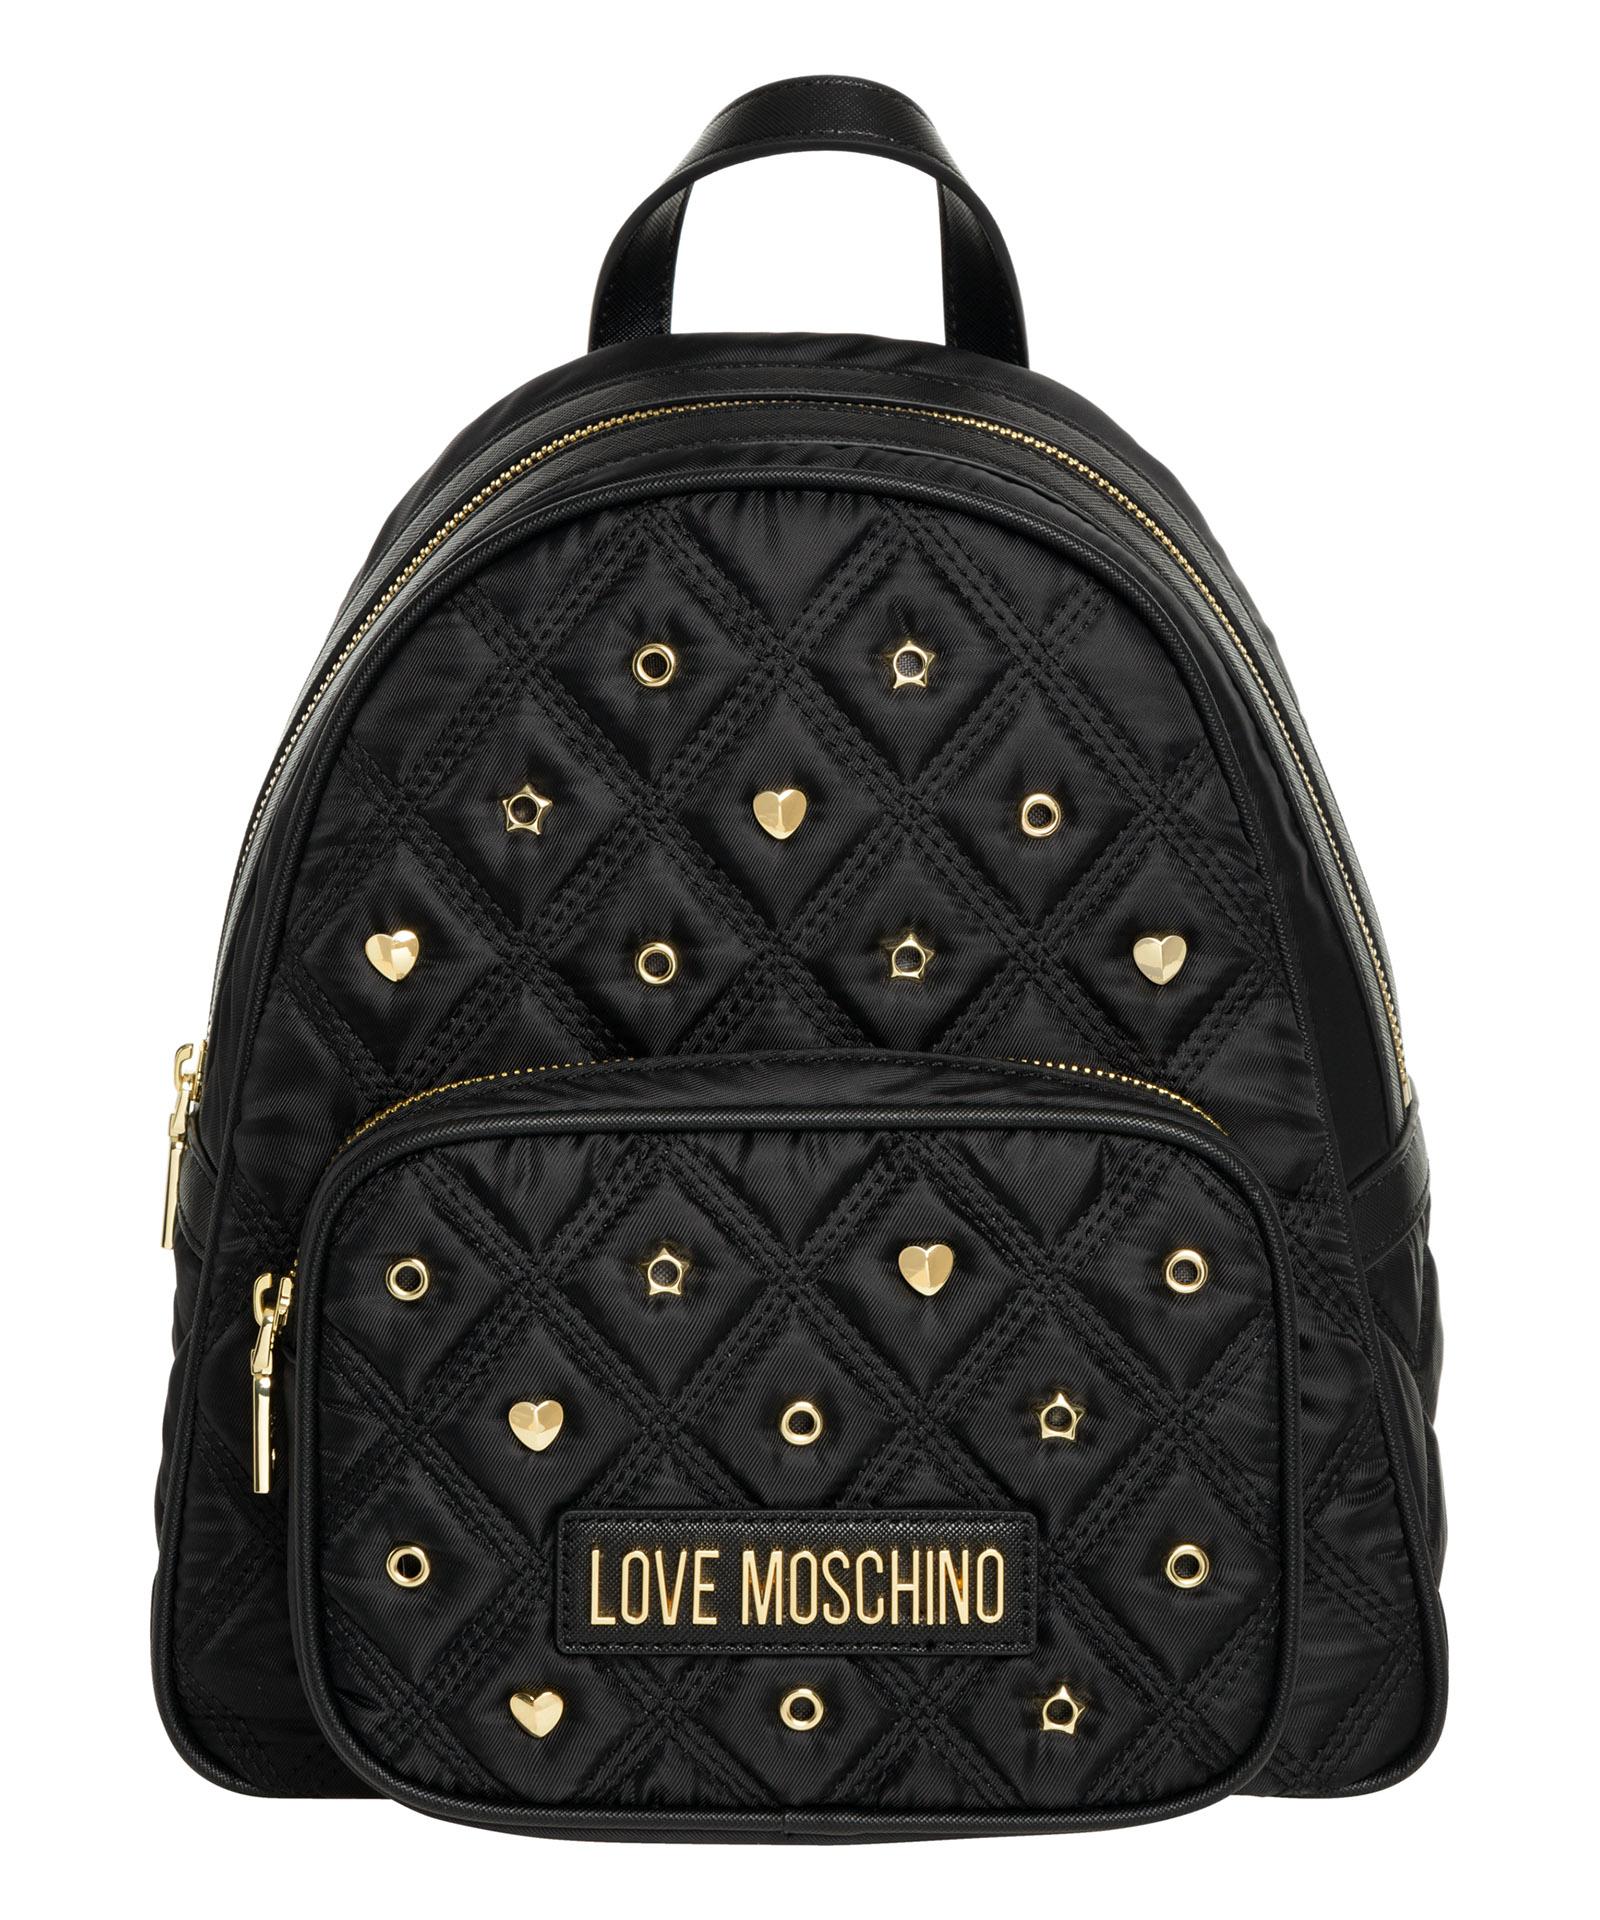 Love Moschino Backpack in Black | Lyst